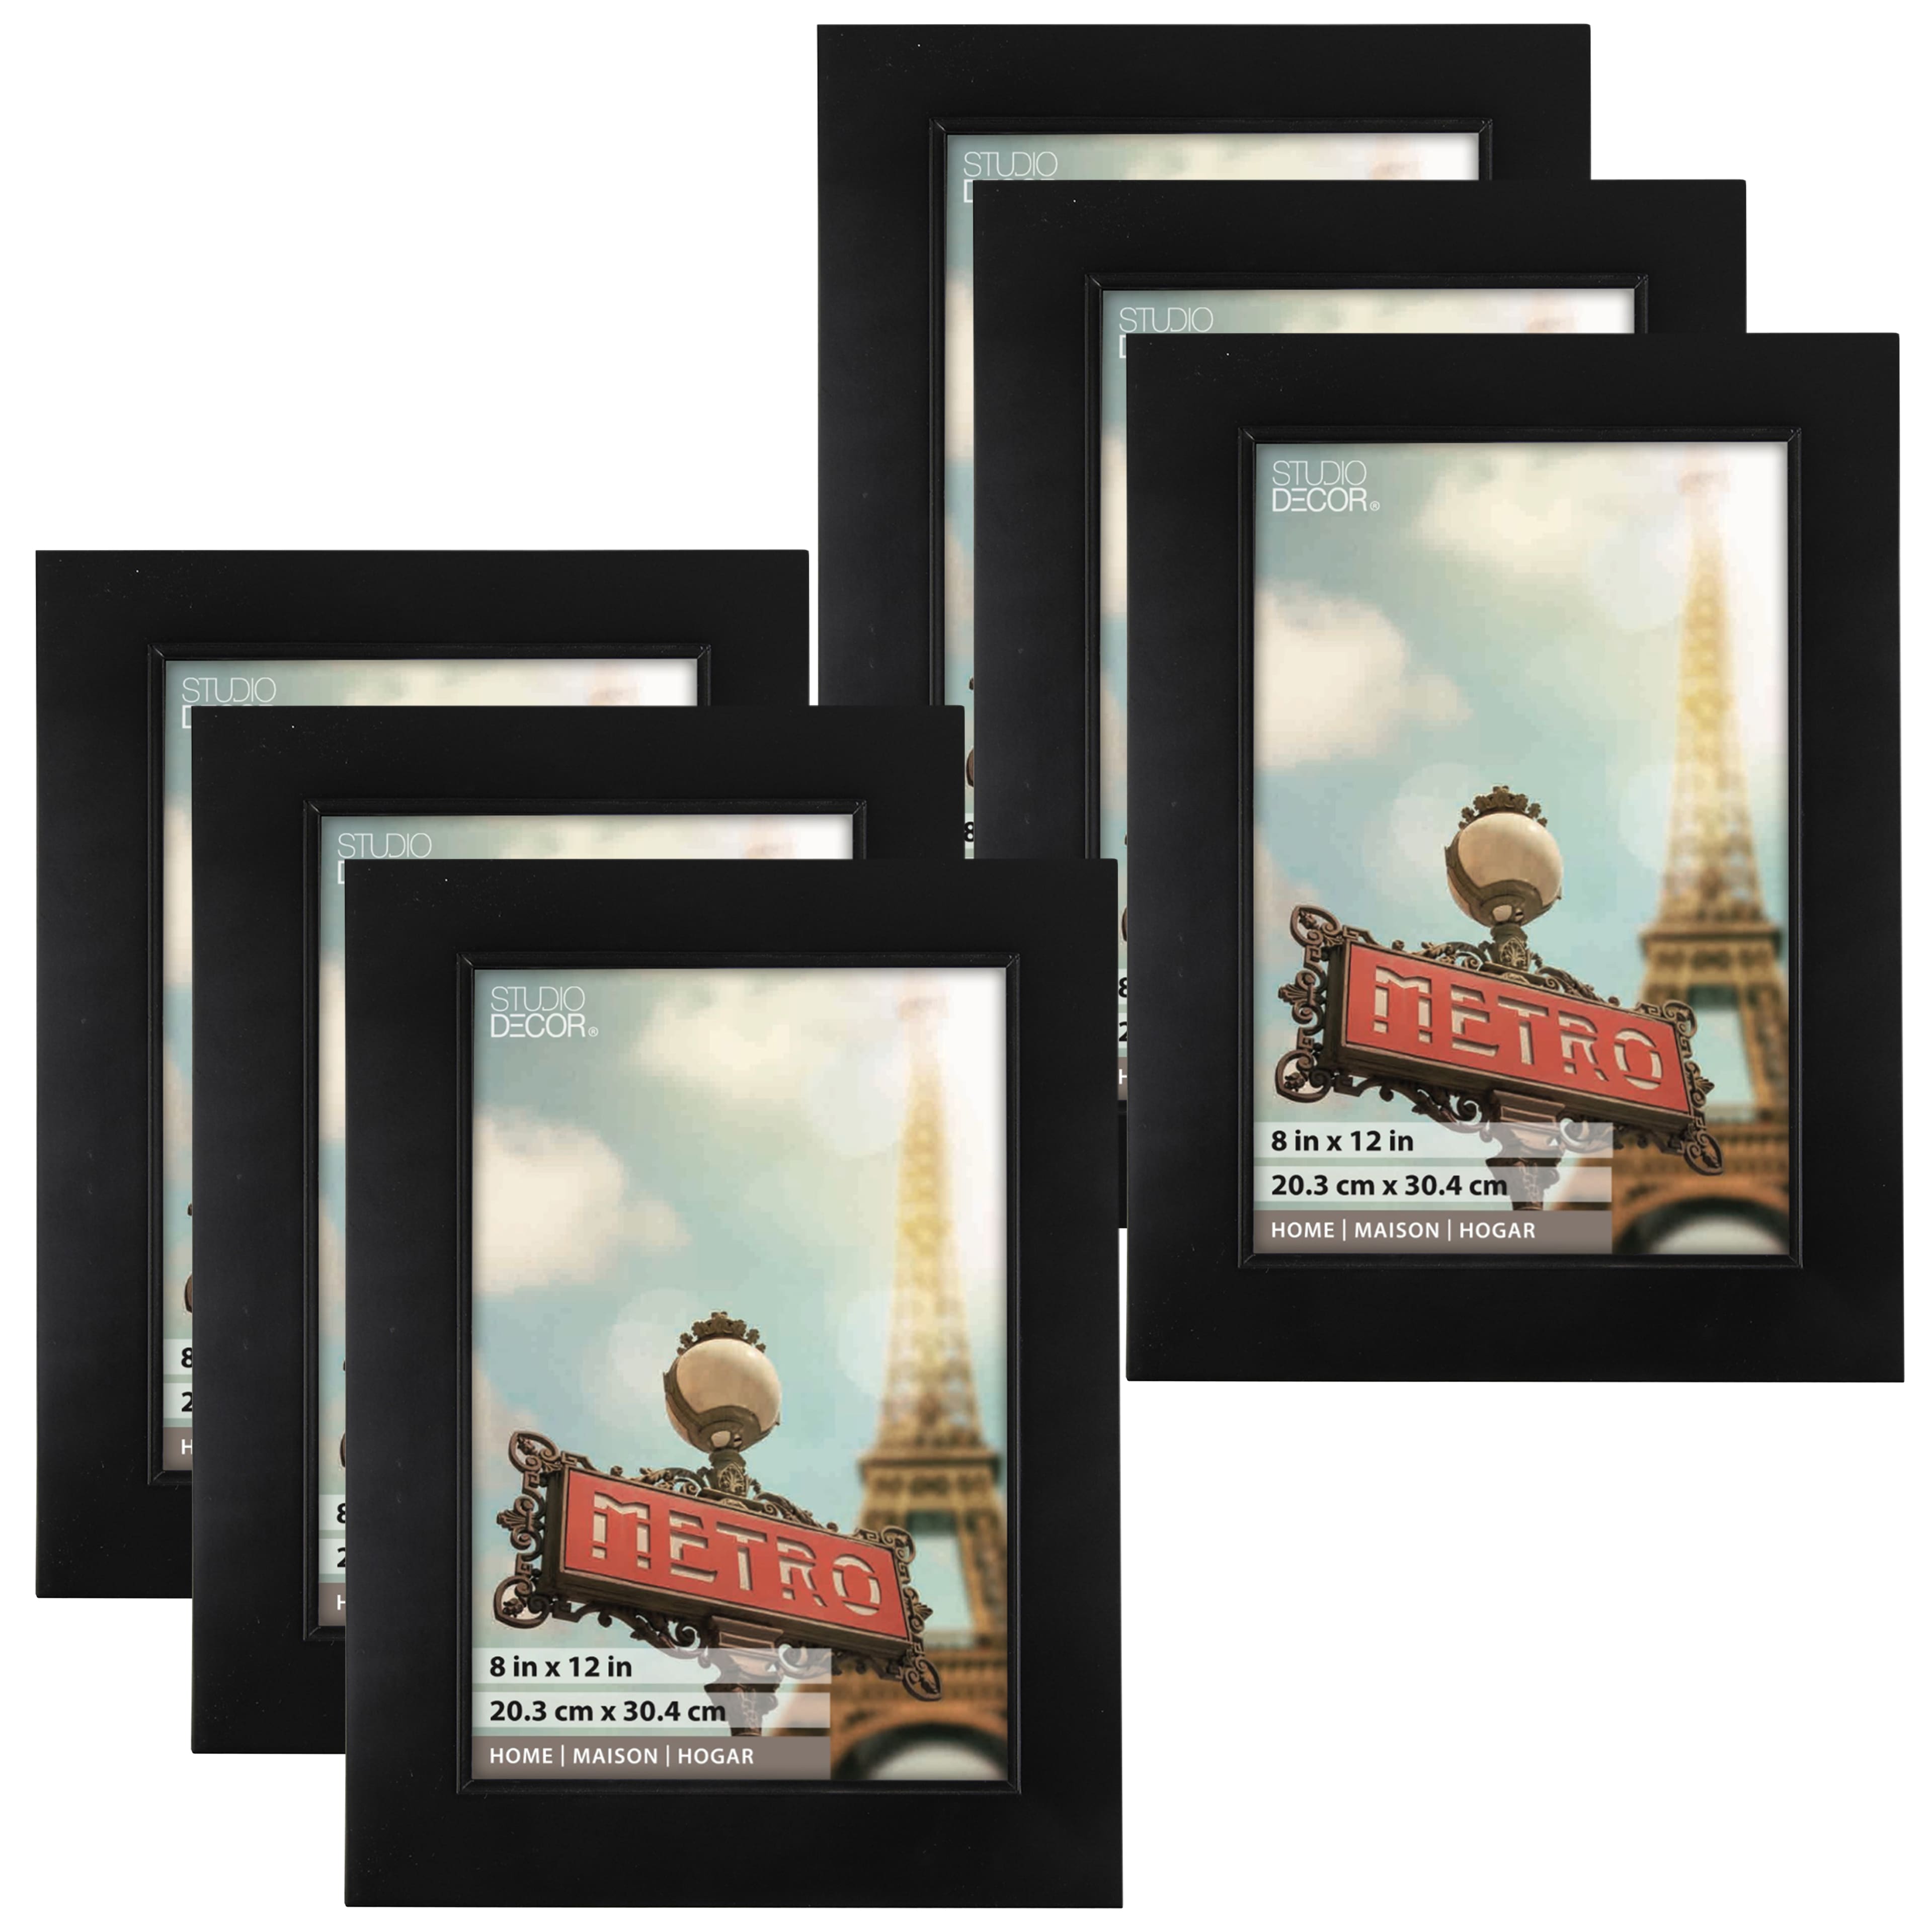 upsimples 12x12 Picture Frame Made of High Definition Glass, Display  Pictures 8x8 with Mat or 12x12 Without Mat, Gallery Wall Frame Set, Gold